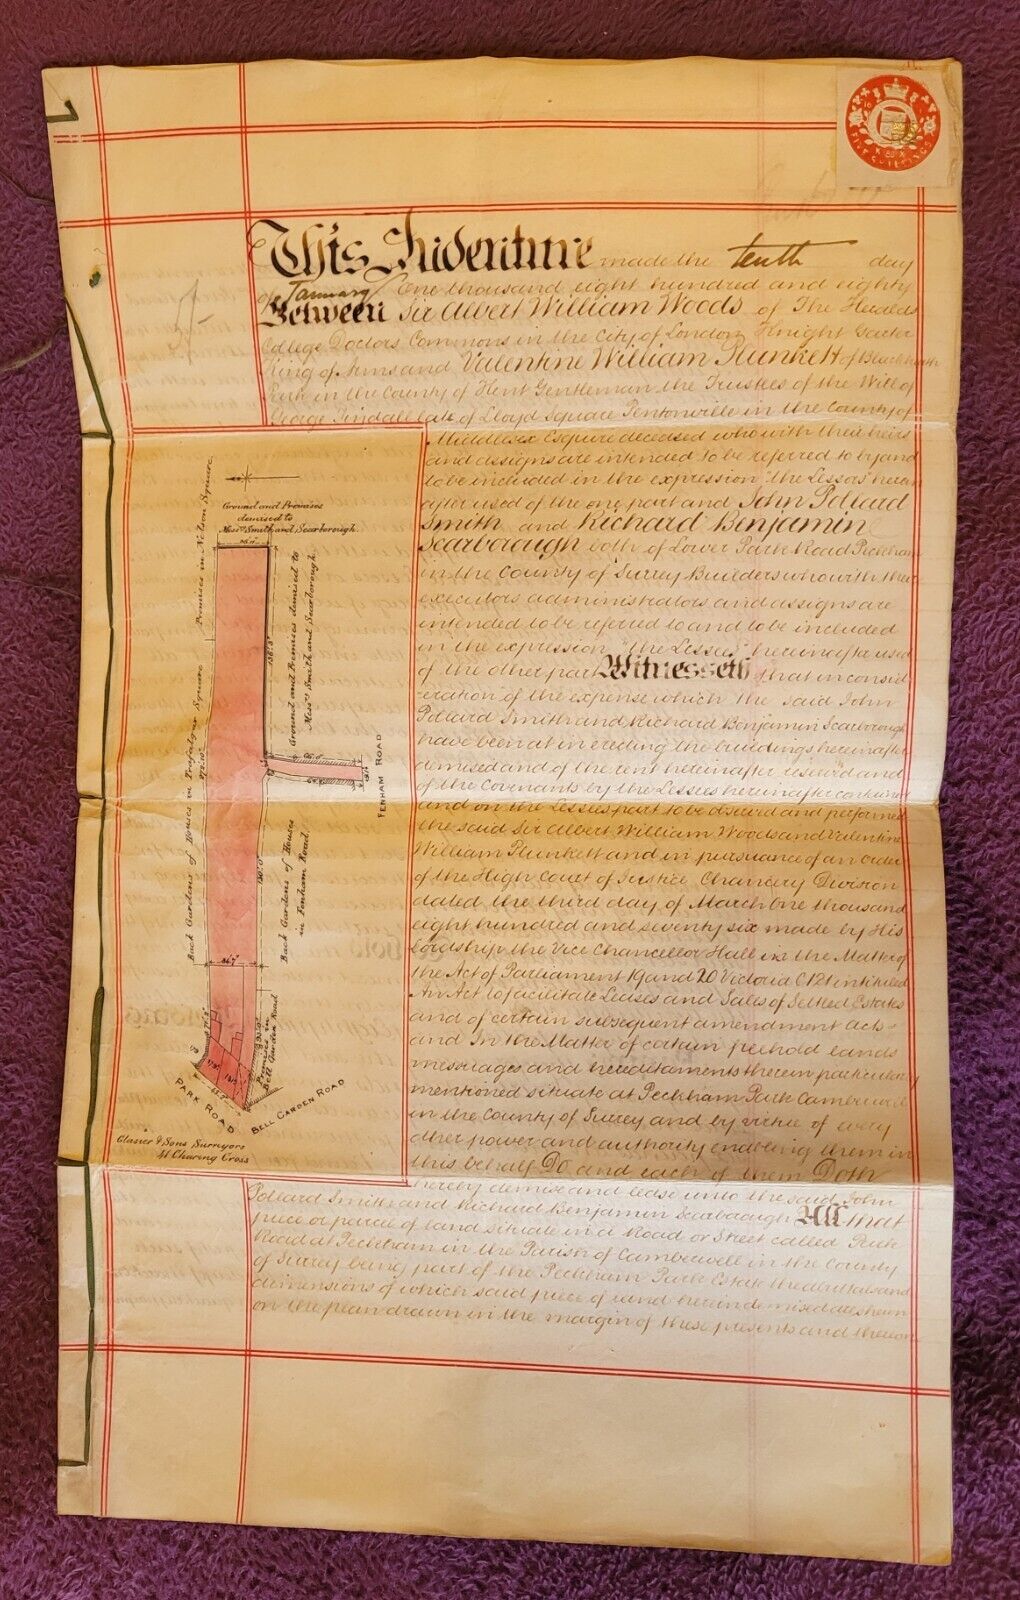 1880 Vellum Indenture. Mentions: Sir Albert William Woods, King of Arms. Lease